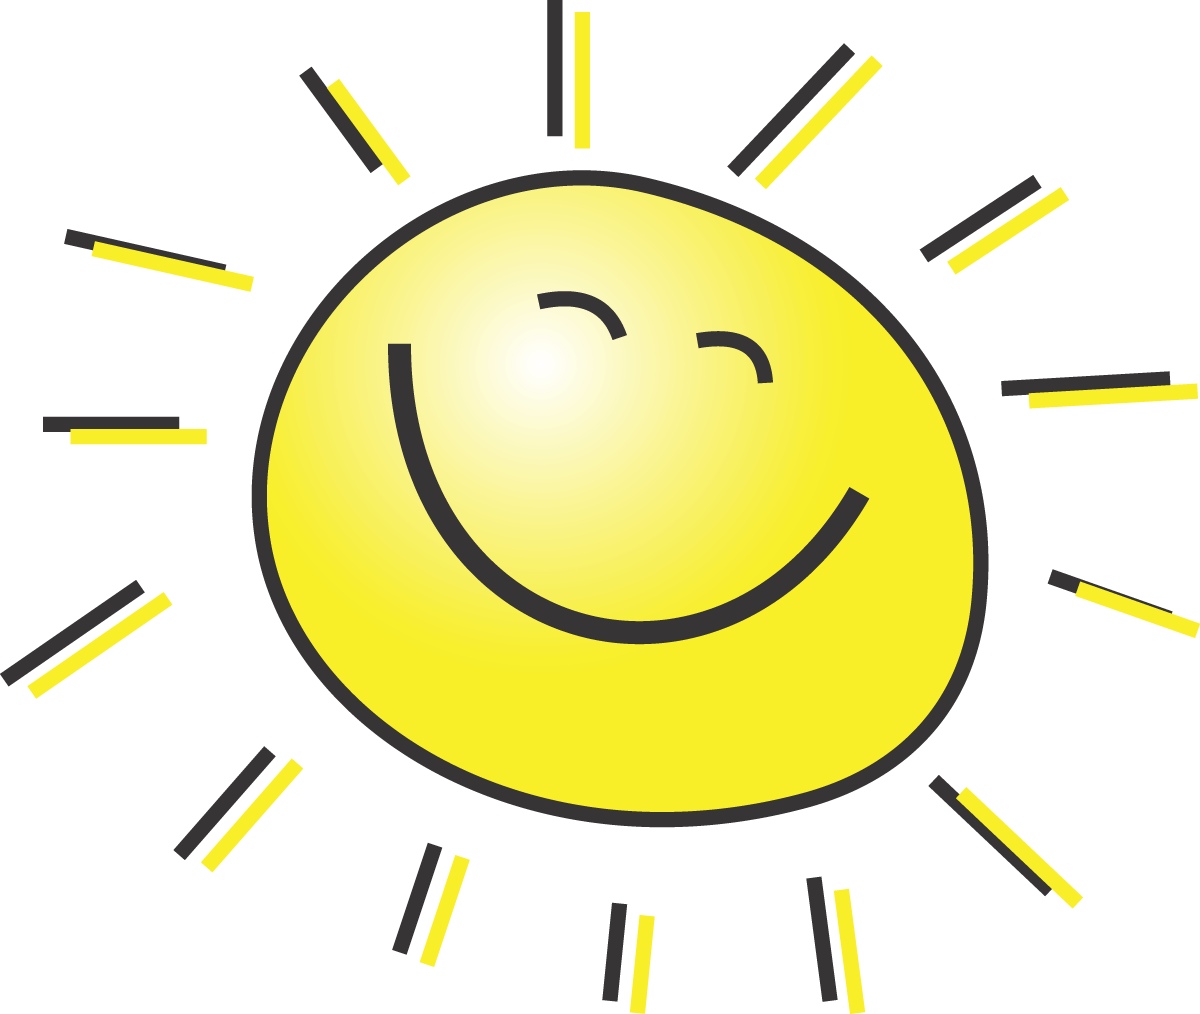 Sun clipart free images